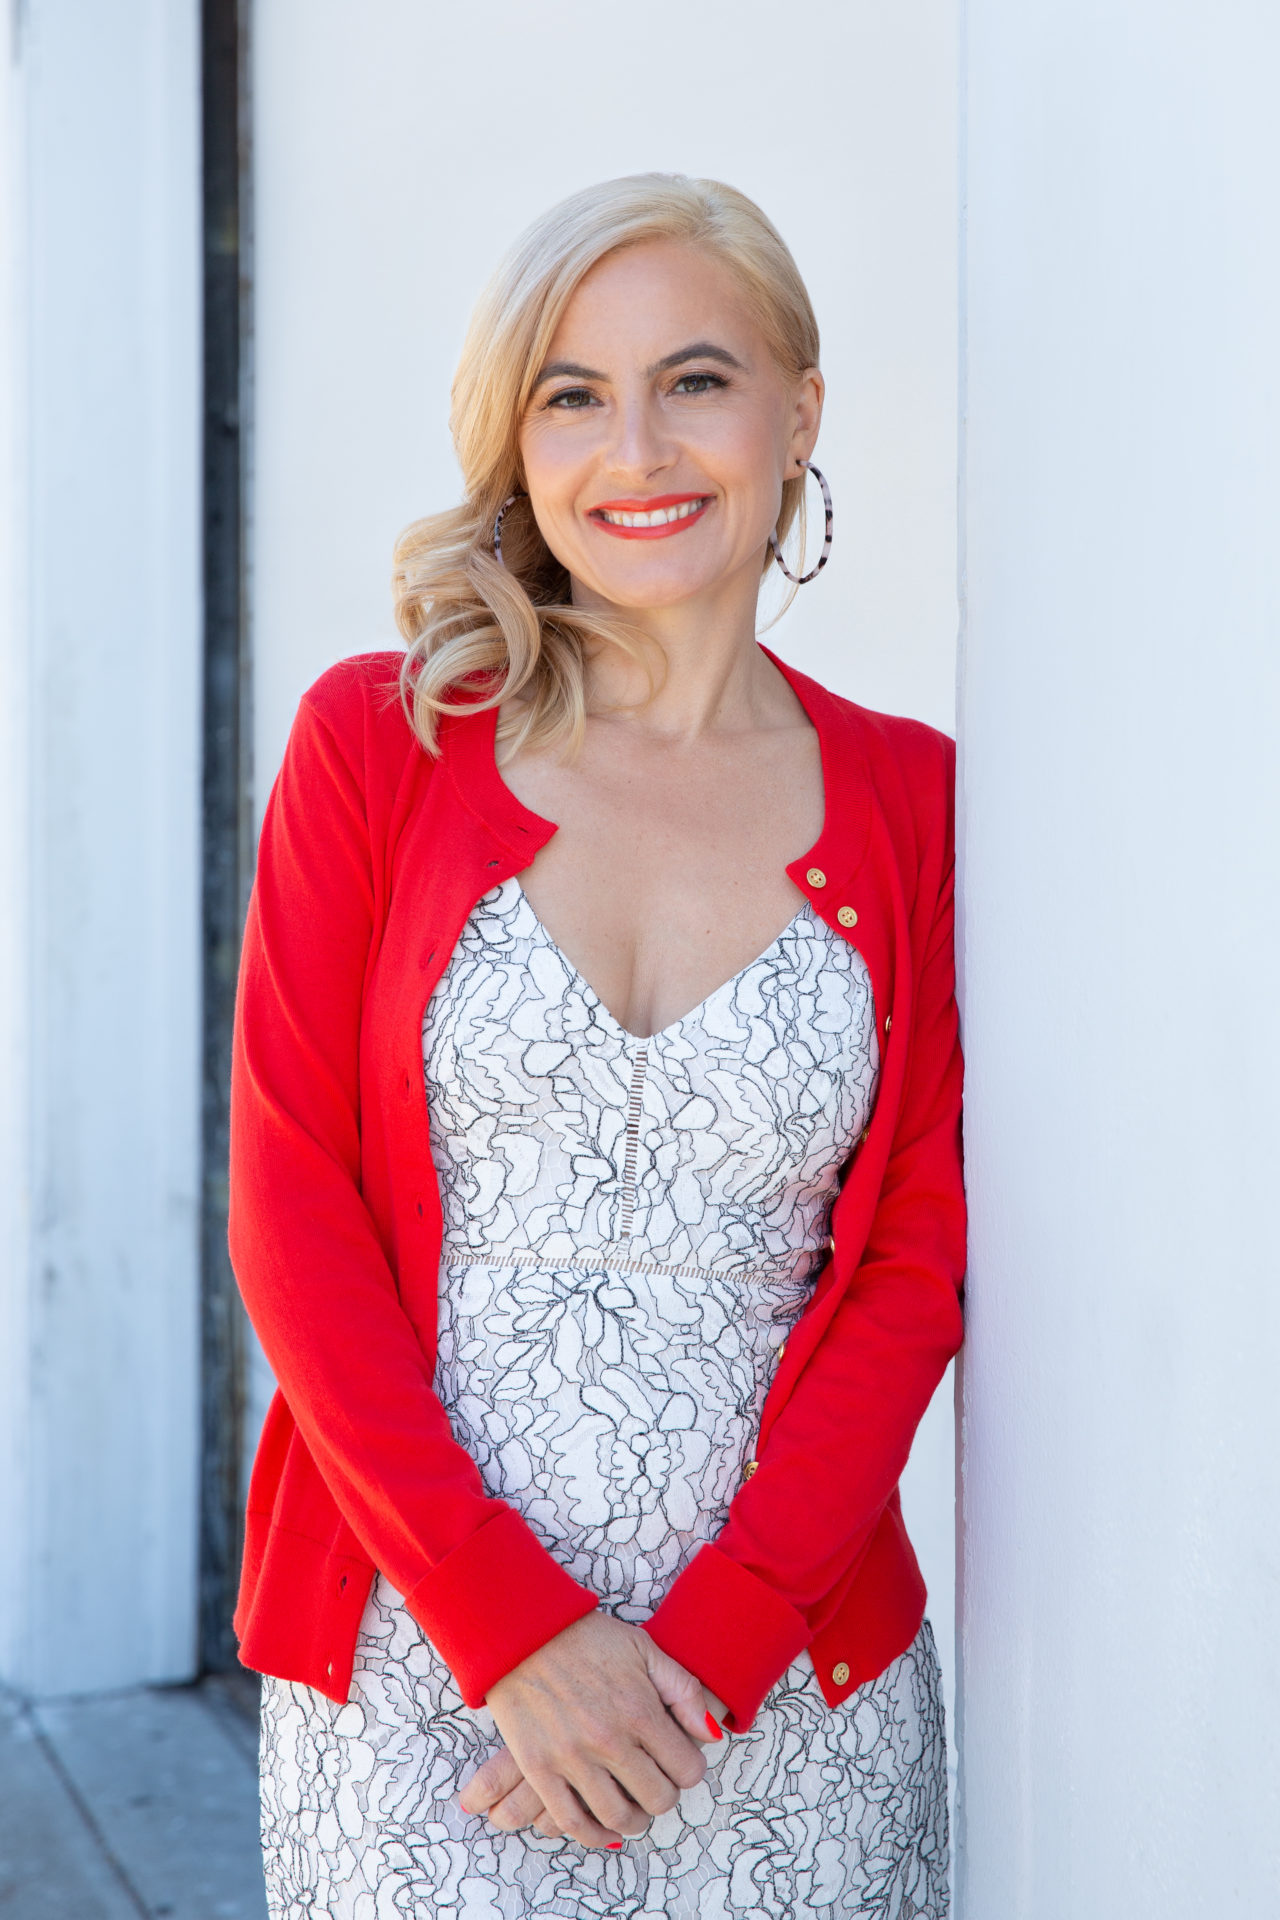 April Hirschman in a white dress with a red sweater leaning against a white wall, smiling.